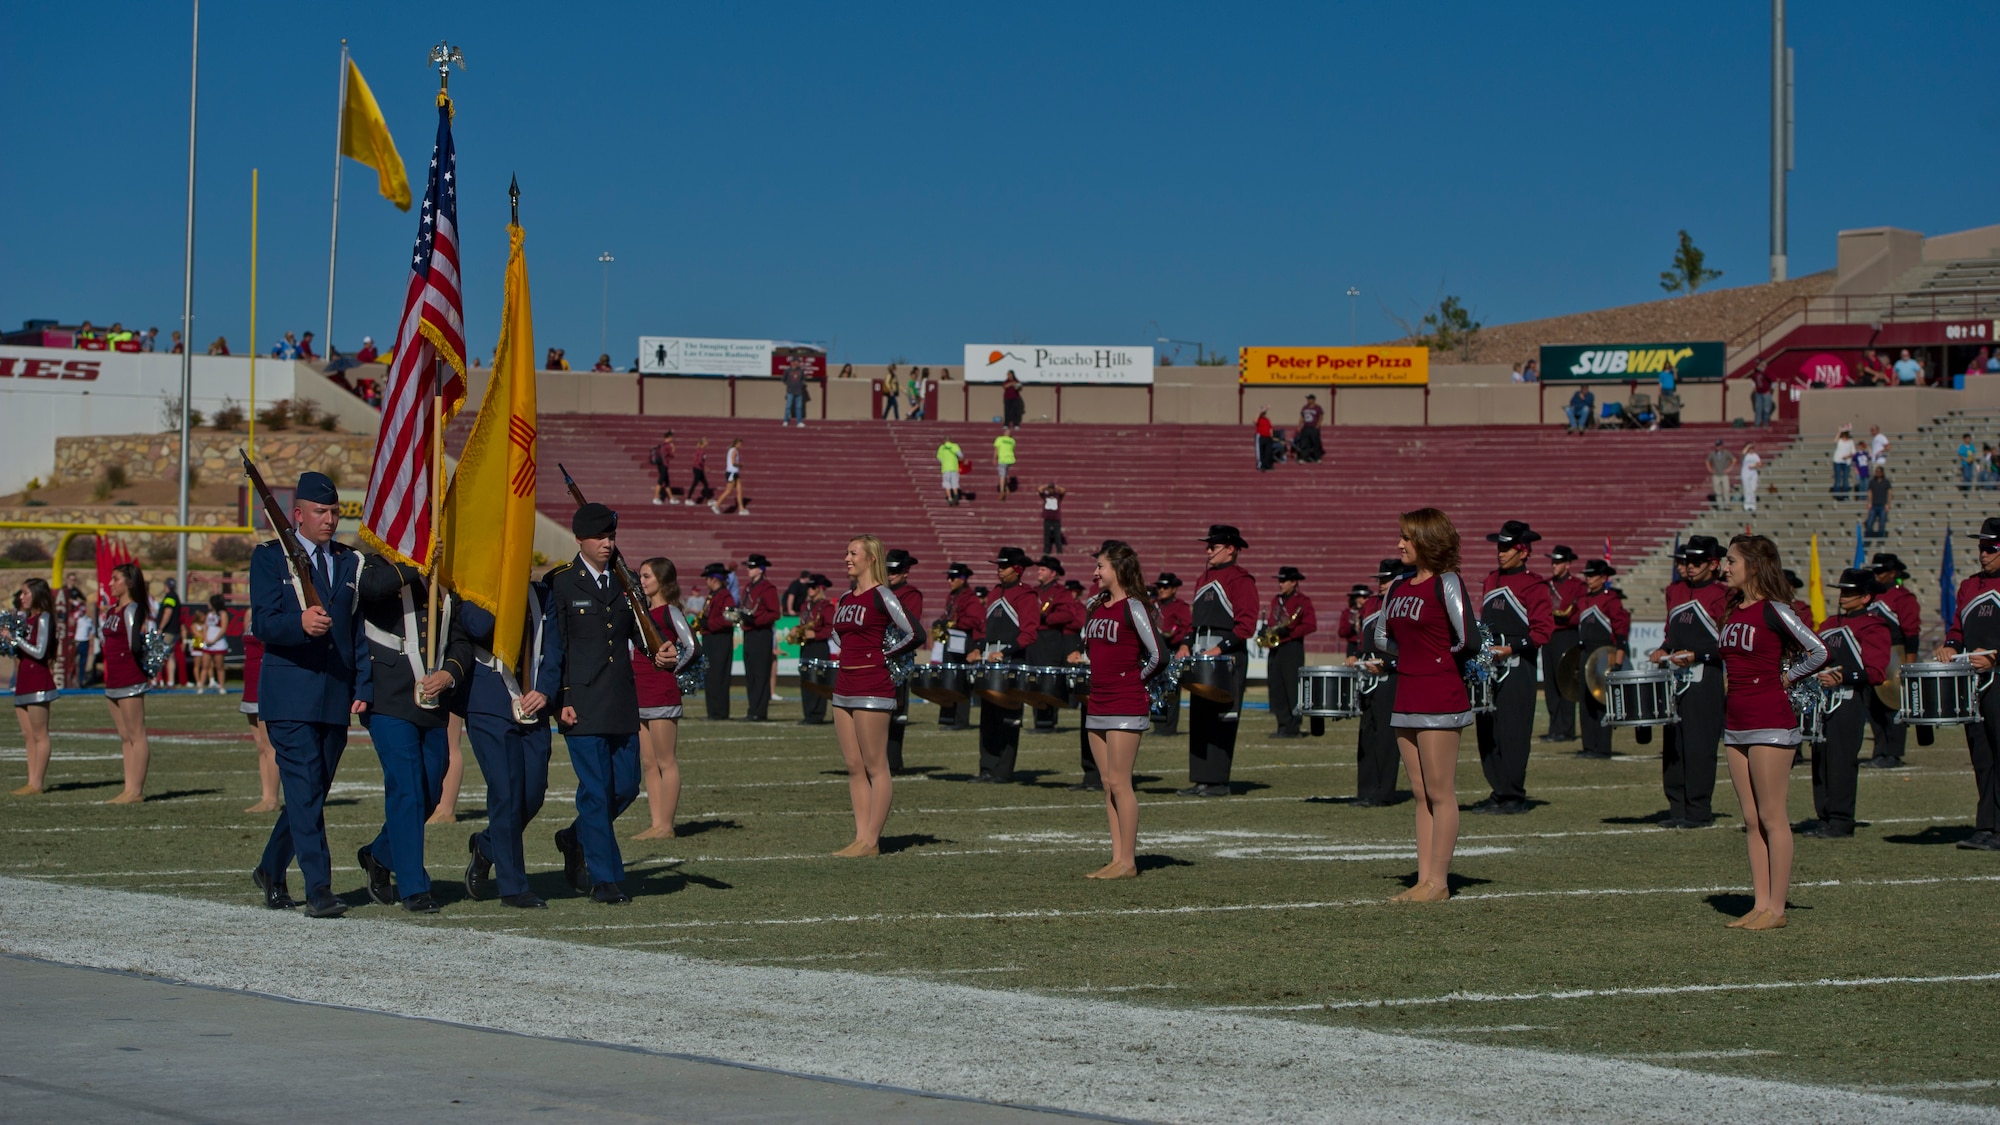 A ROTC color guard, consisting of Army and Air Force members displays the United States and New Mexican flags during the opening ceremony at Aggie Memorial Stadium in Las Cruces, N.M., Nov. 9. NMSU hosted Boston College for their annual military appreciation game, which honored current and past military veterans. (U.S. Air Force photo by Airman 1st Class Aaron Montoya/Released)